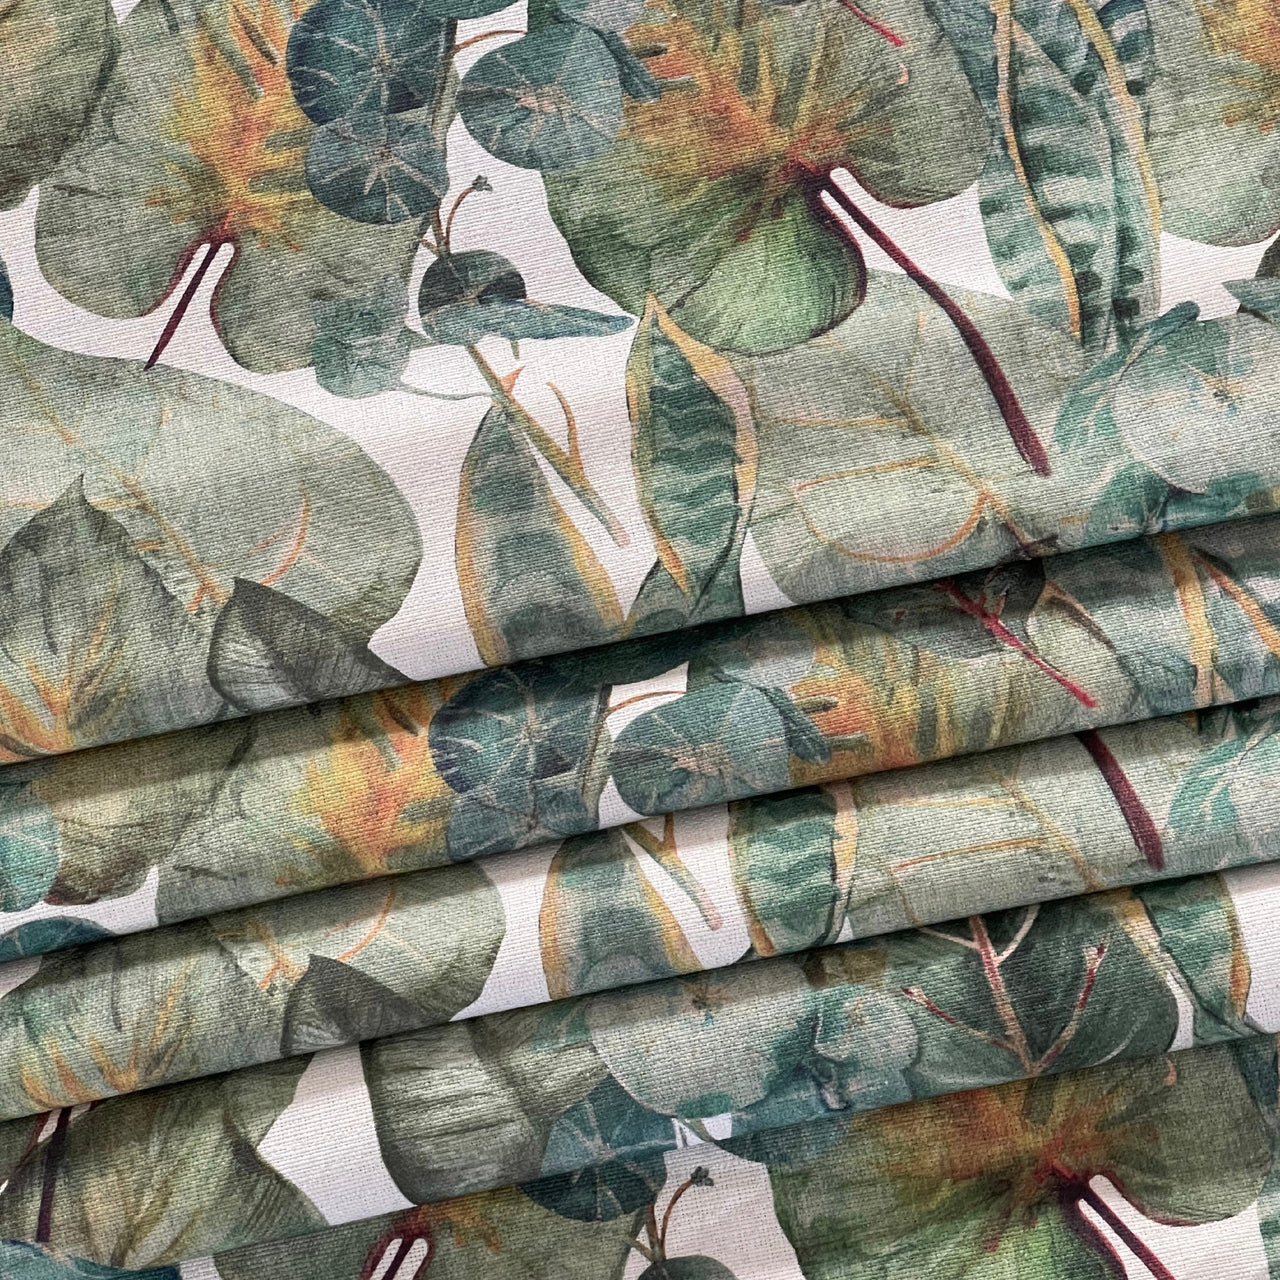 Tropical Oasis Botanical Fabric by the Meter: Houseplant Leaves Print / Greenery - Calathea, Snake Plant, and Elephant Ear